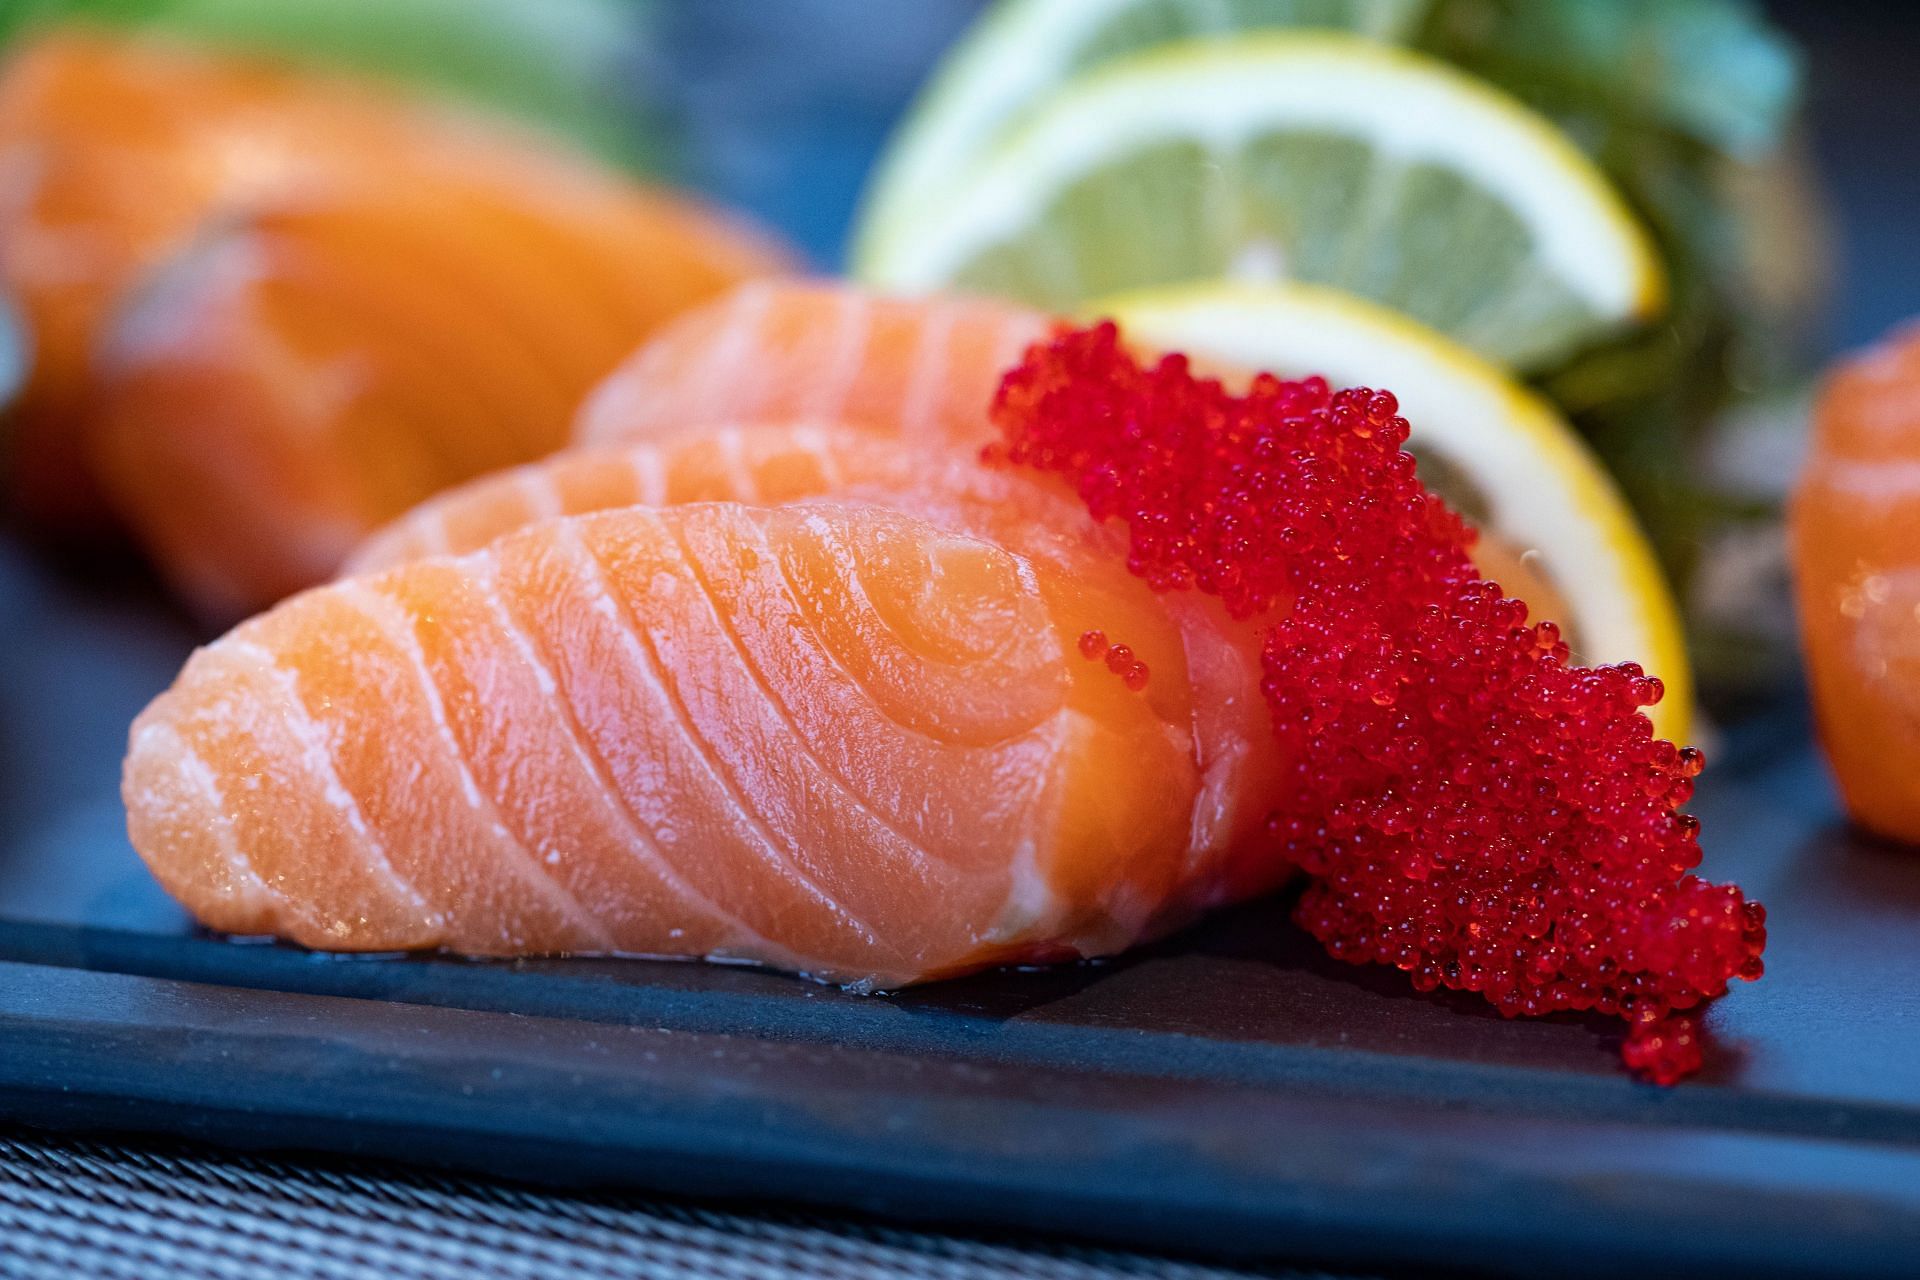 Salmon is one of the best food to eat when sick. (Image via Pexels/Valeria Boltneva)